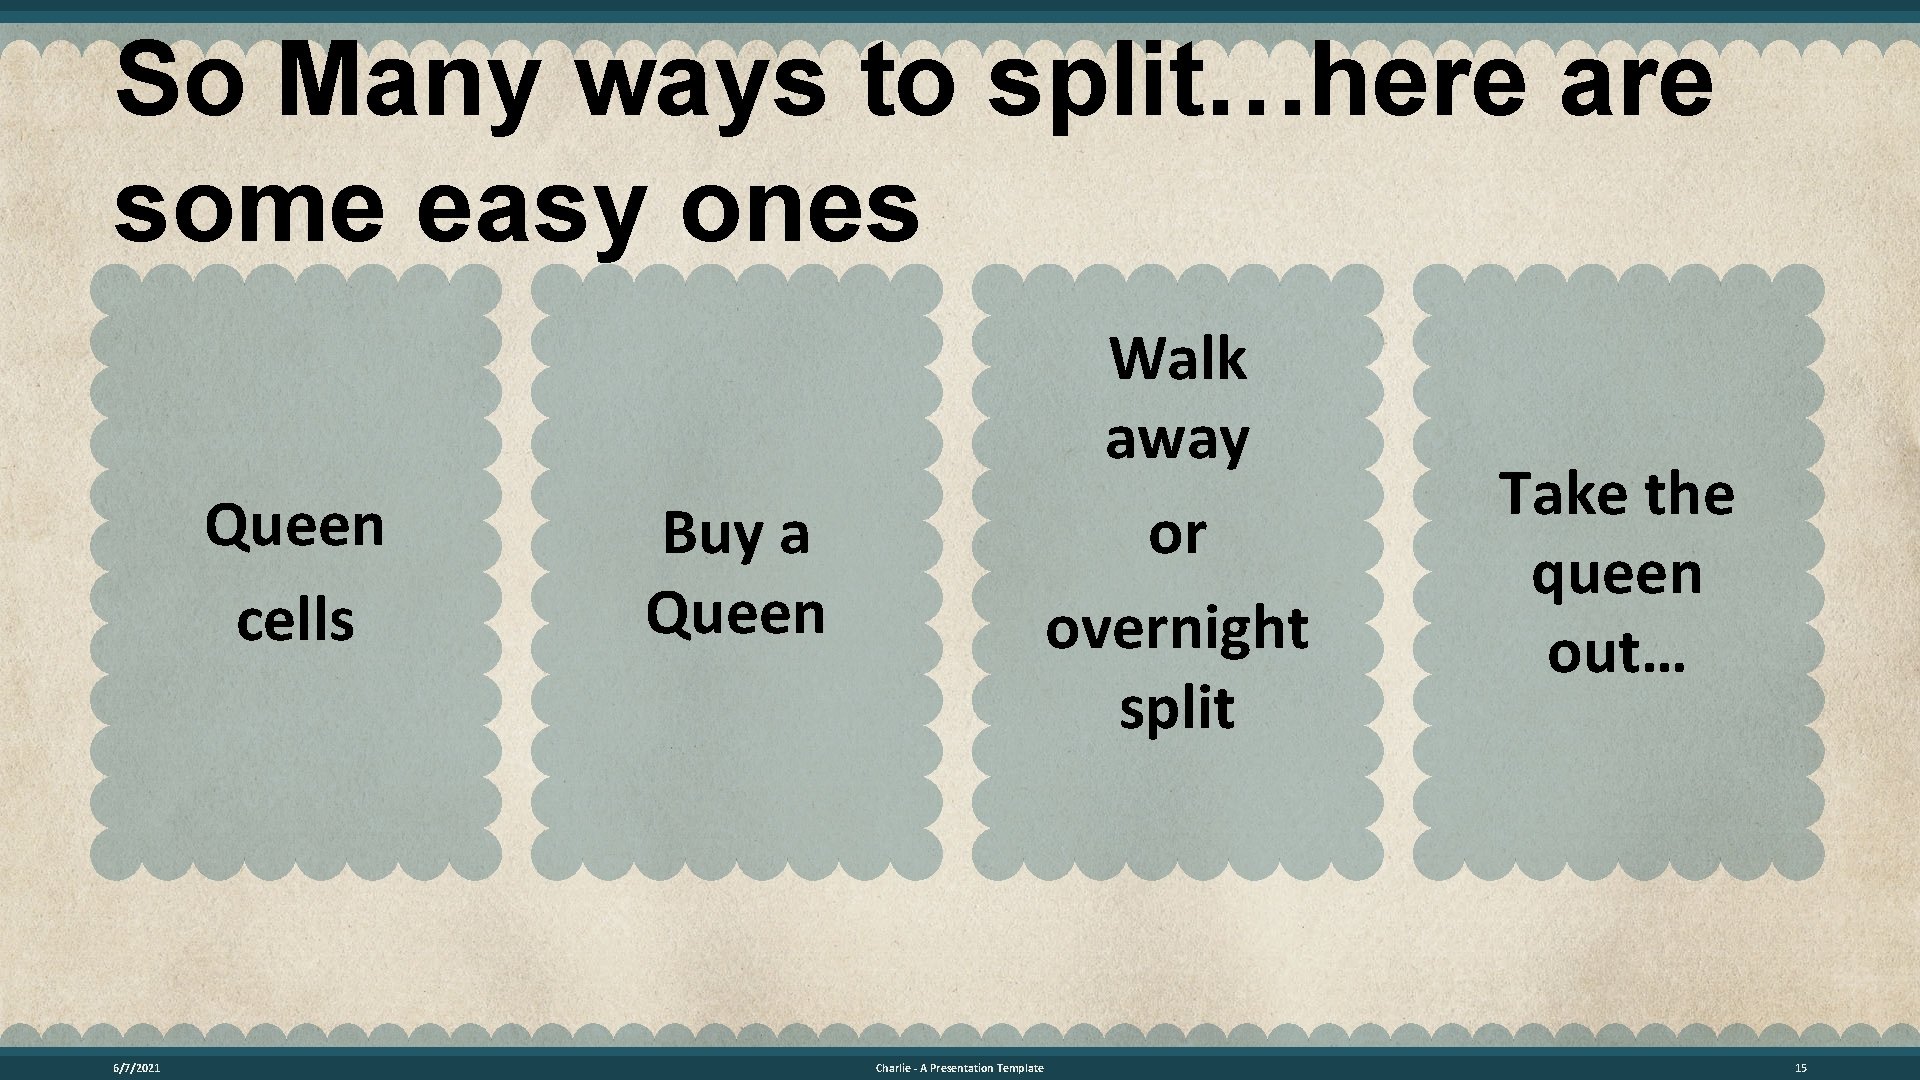 So Many ways to split…here are some easy ones Queen cells 6/7/2021 Walk away